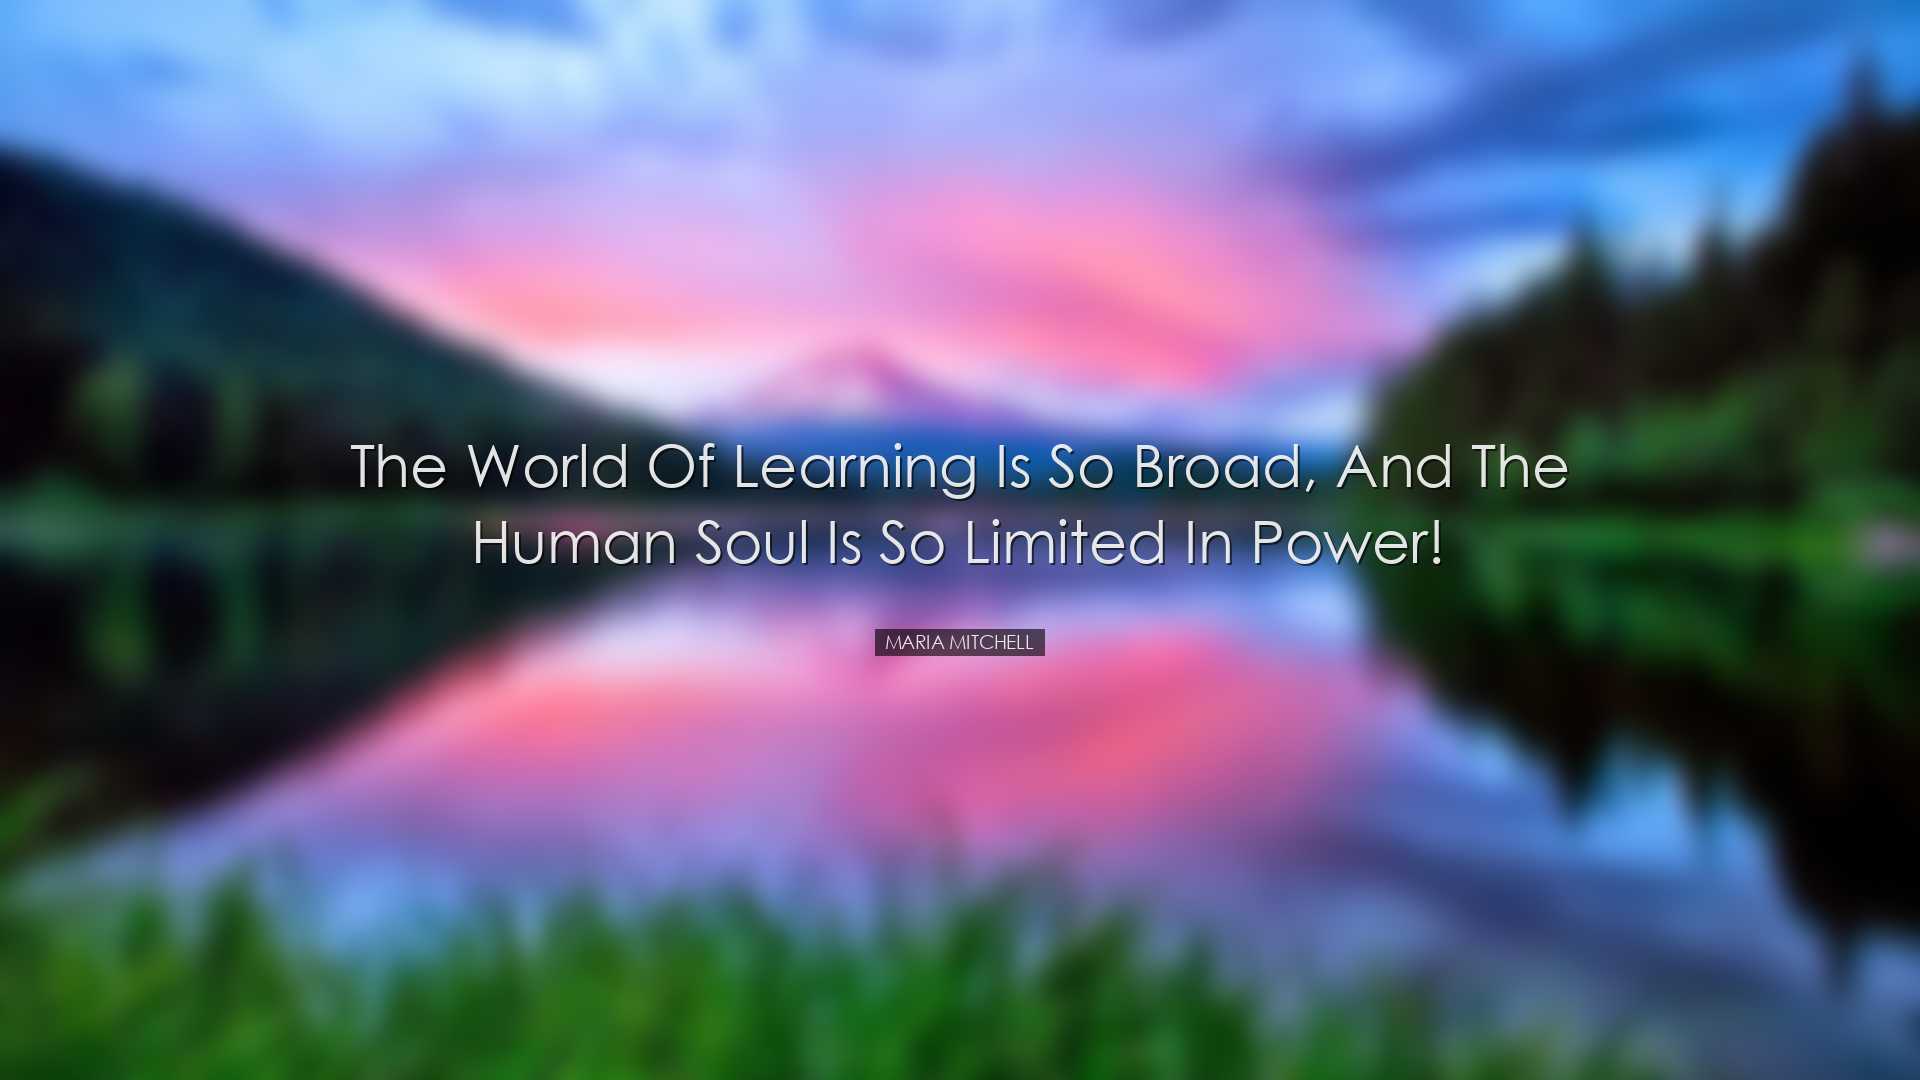 The world of learning is so broad, and the human soul is so limite